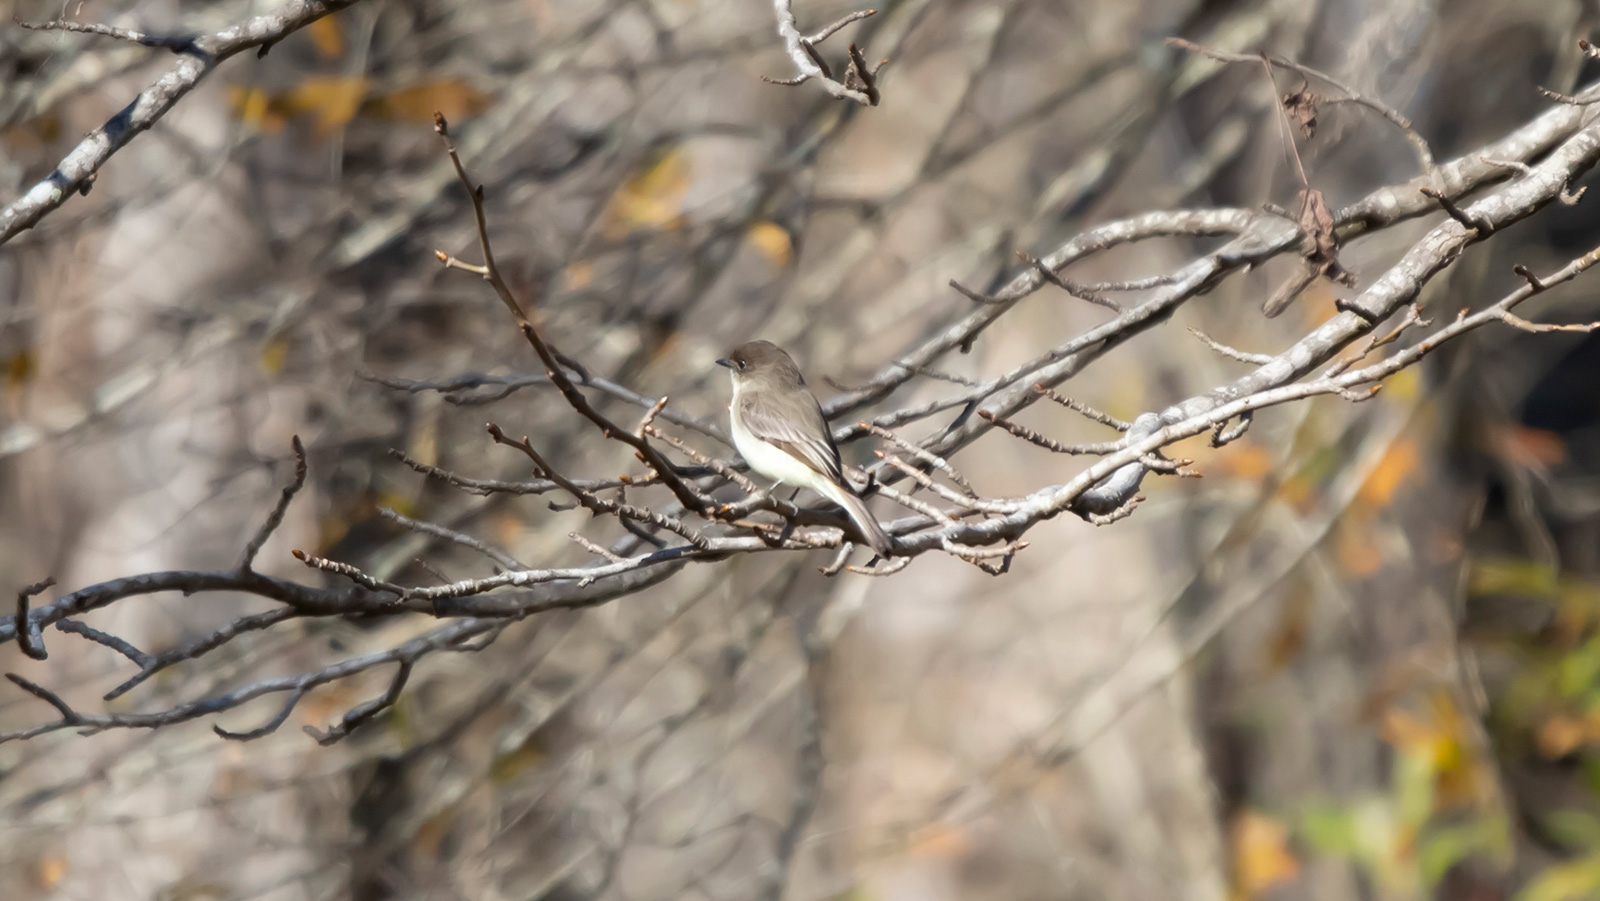 Eastern phoebe standing on a branch